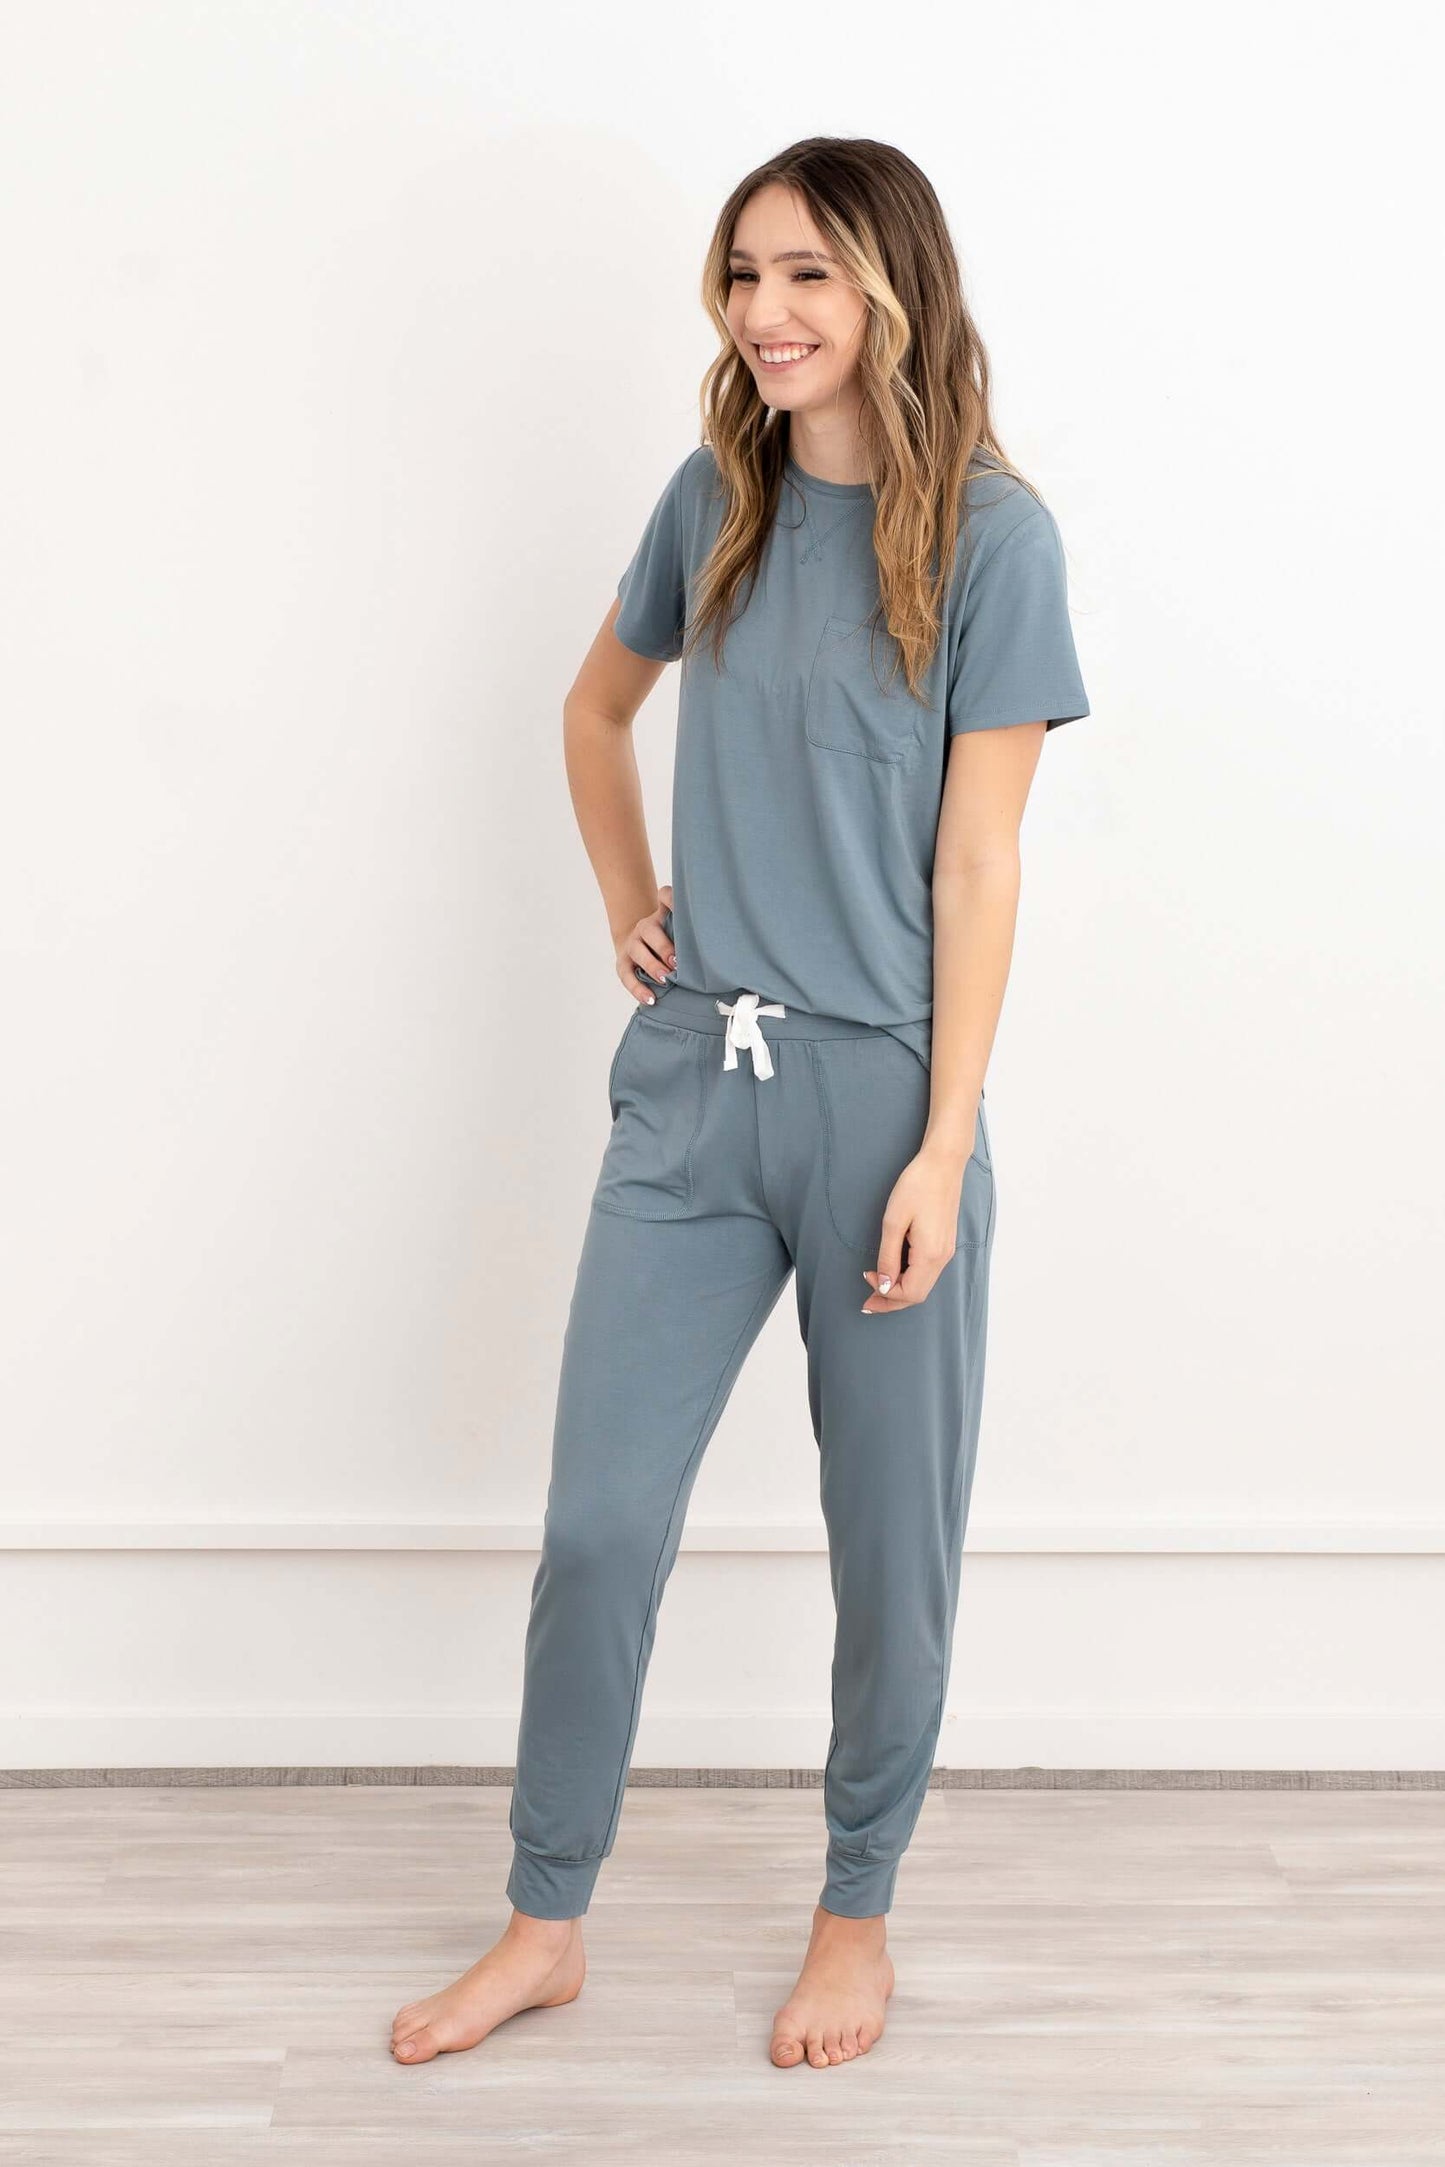 In this photo, a girl exudes casual elegance in our Blue-Gray Modal Short Sleeve and Pants Pajama Set. The soft, breathable fabric drapes gracefully, offering both comfort and style. The cool blue-gray hue adds a touch of sophistication to her relaxed ens